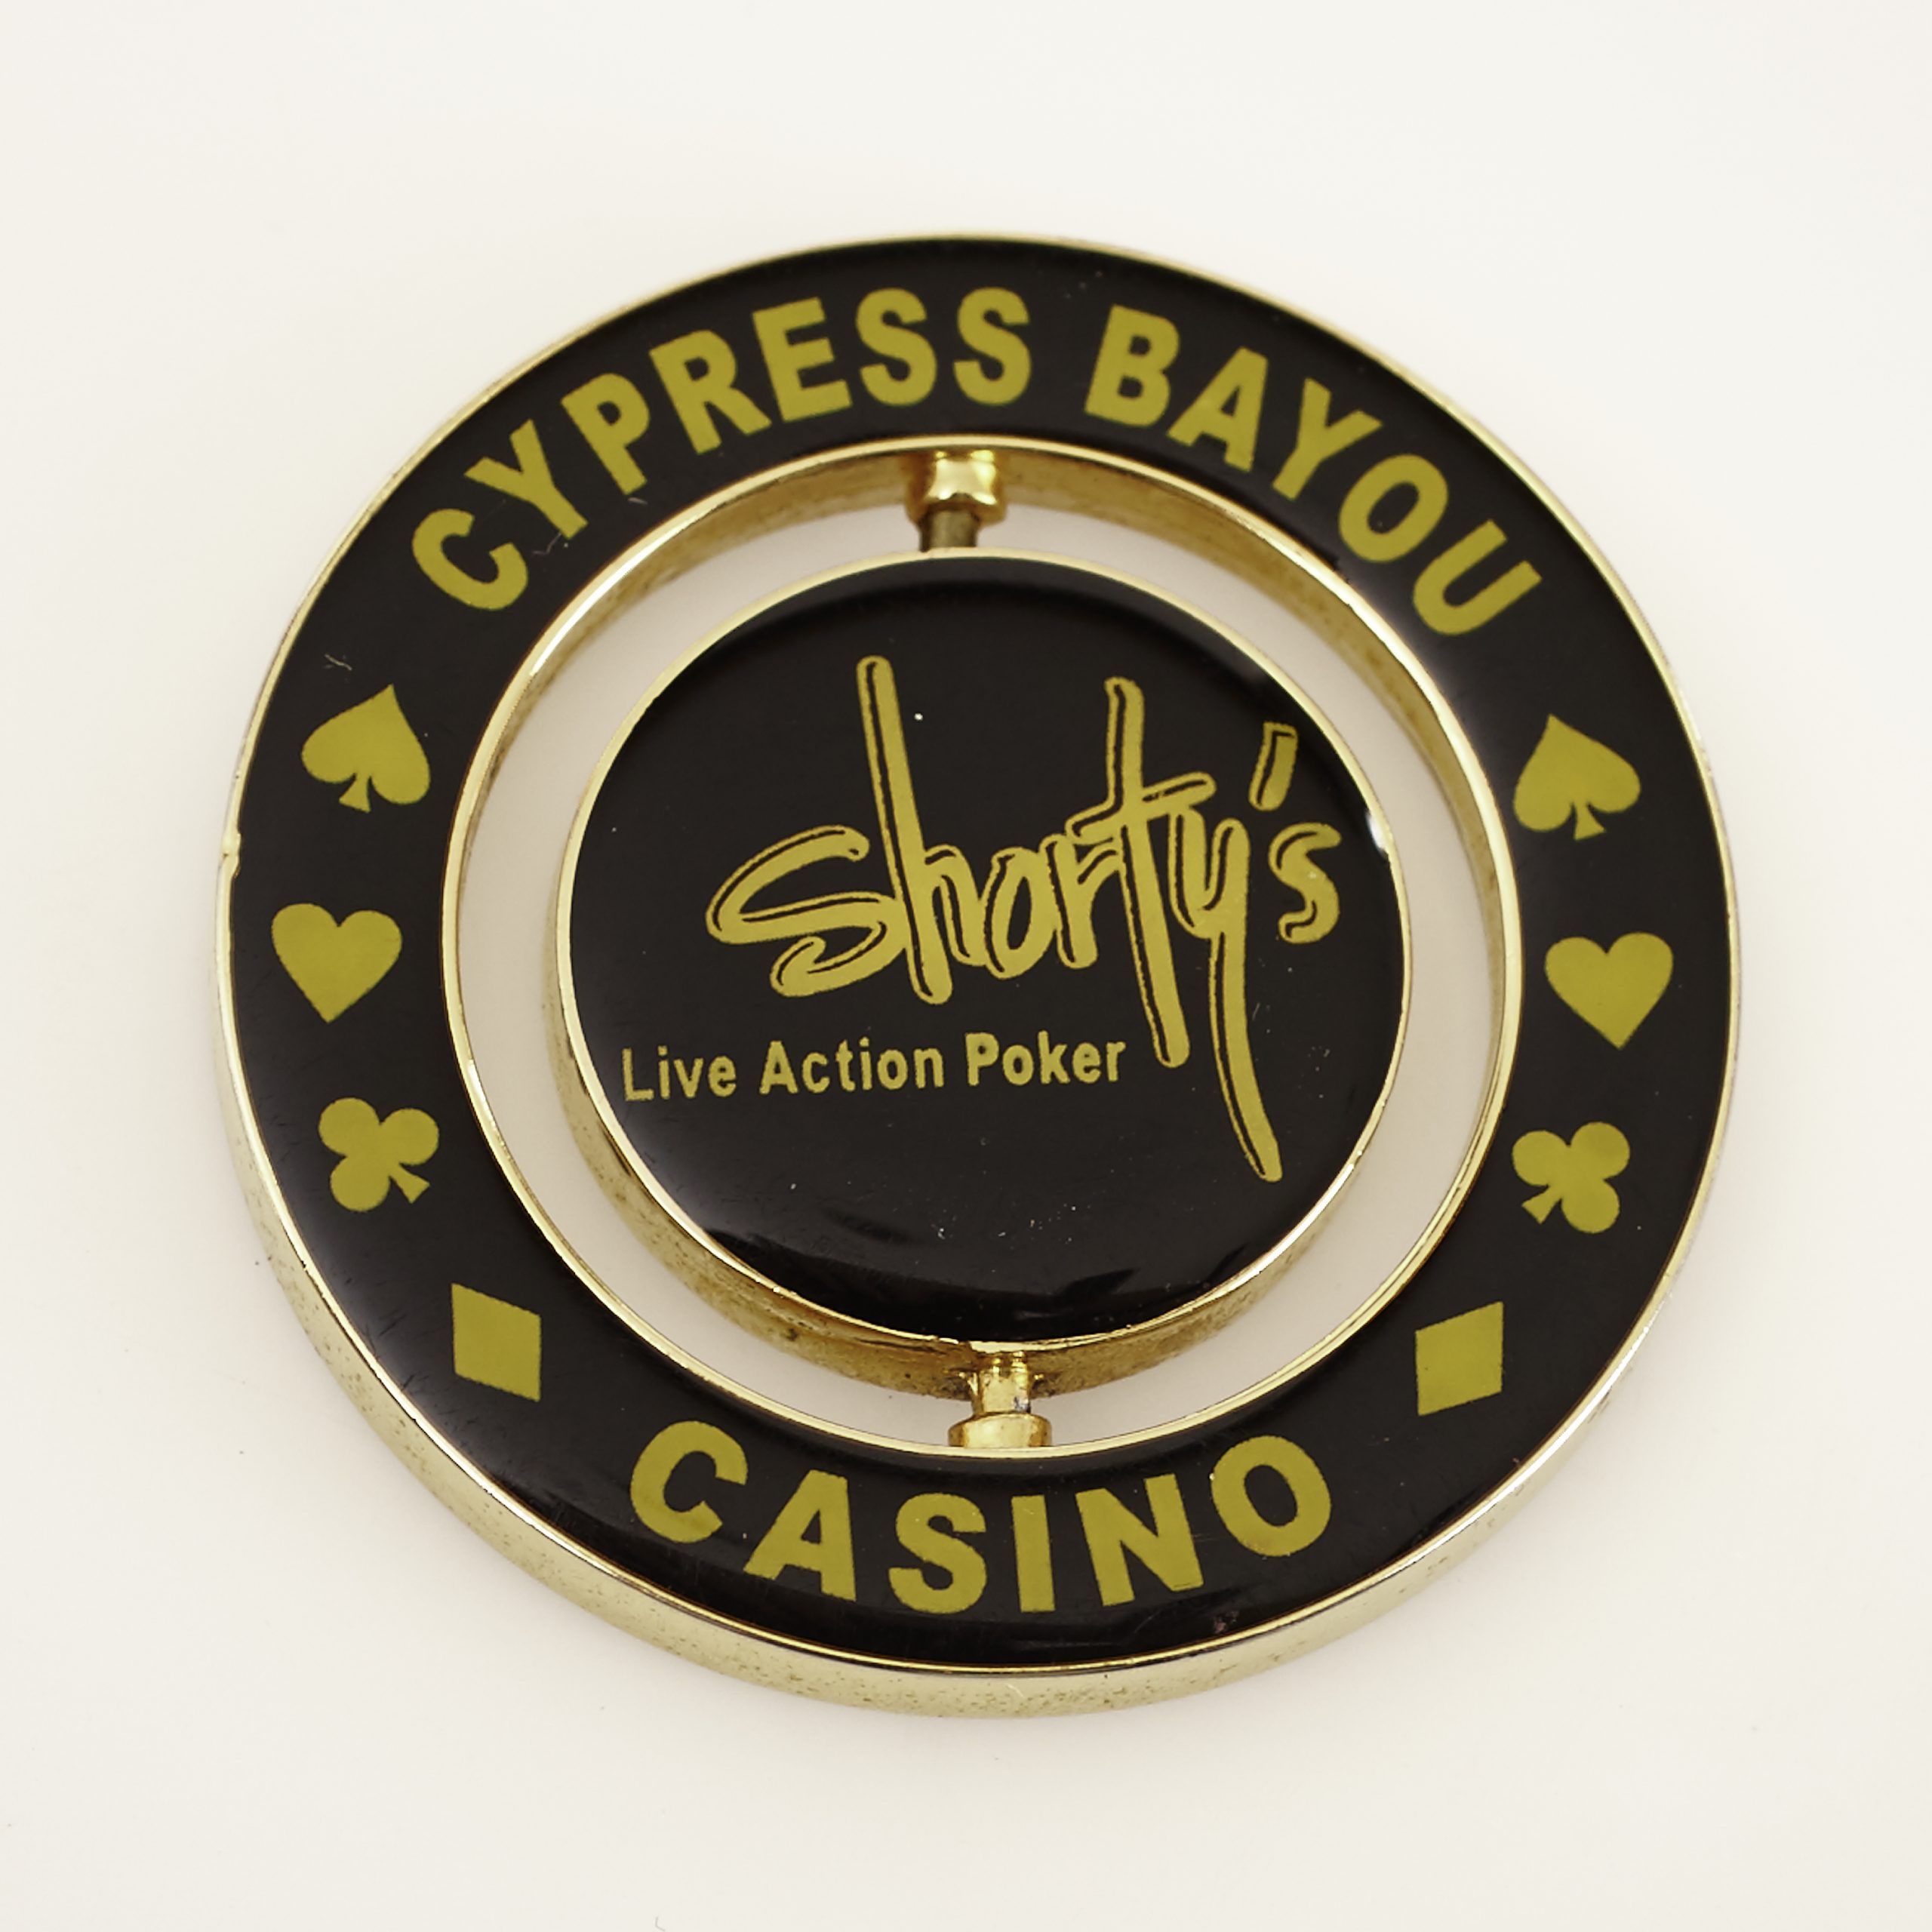 CYPRESS BAYOU CASINO, SHORTY’S LIVE ACTION POKER, SPINNER Poker Card Guard